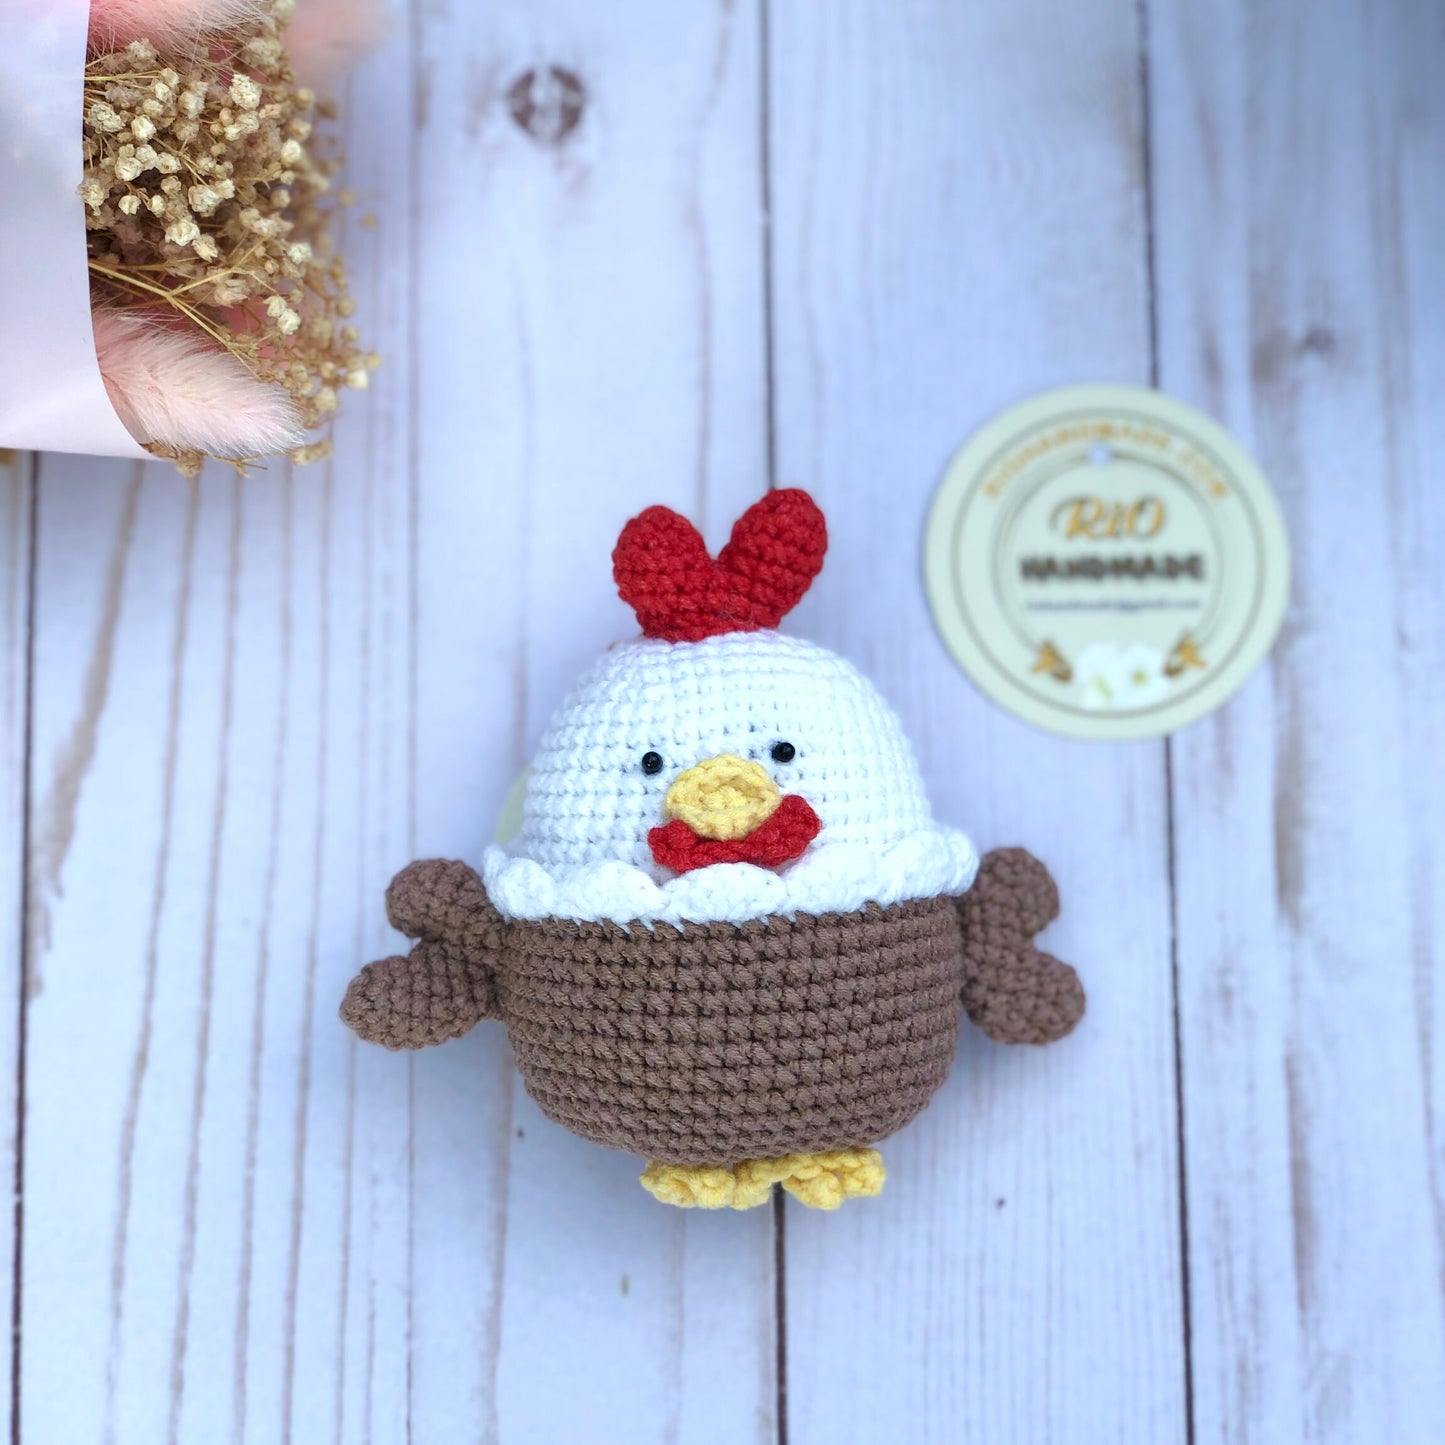 Handmade crochet chicken, pom bag charm, amigurumi rooster, cute, soft toy for baby, toddler, kid, adult hobby